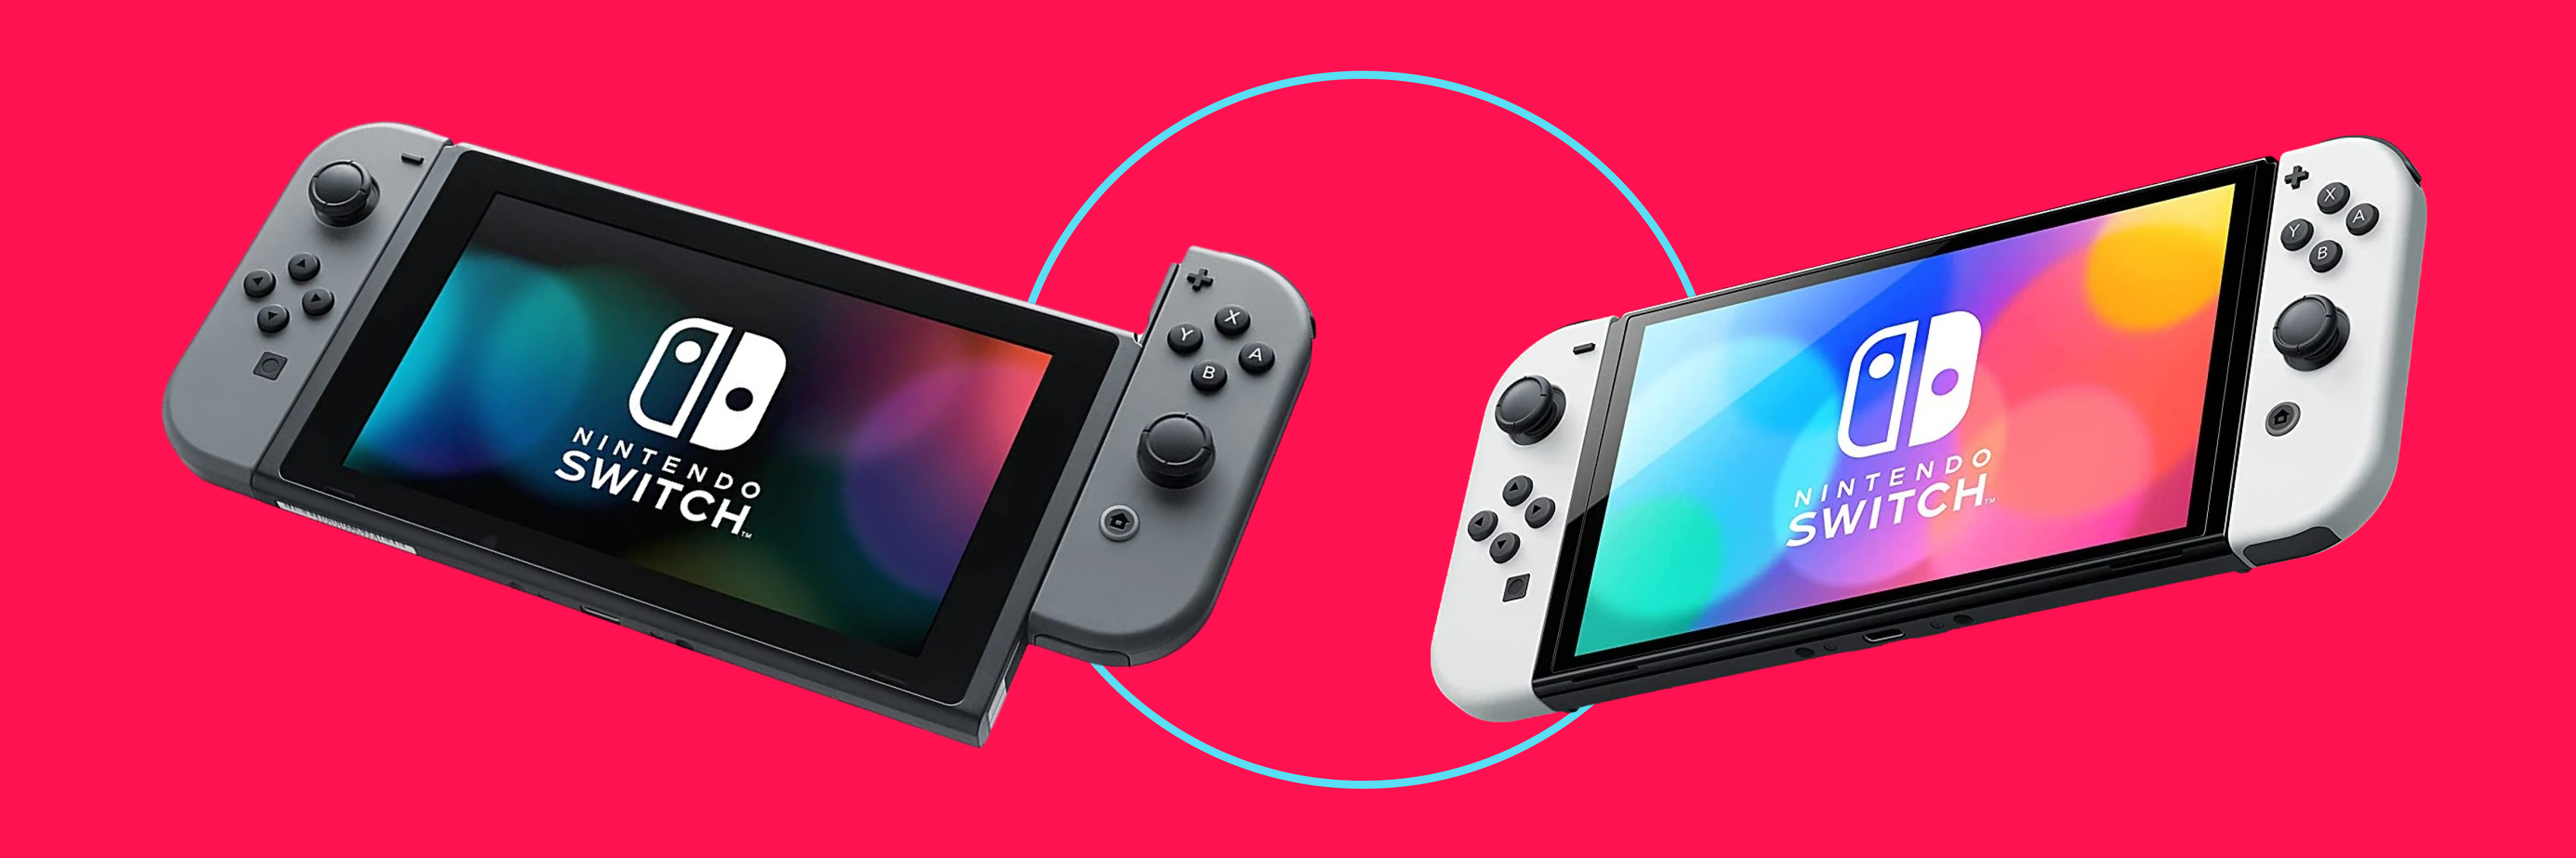 Key differences between Nintendo Switch OLED vs original model | Grover